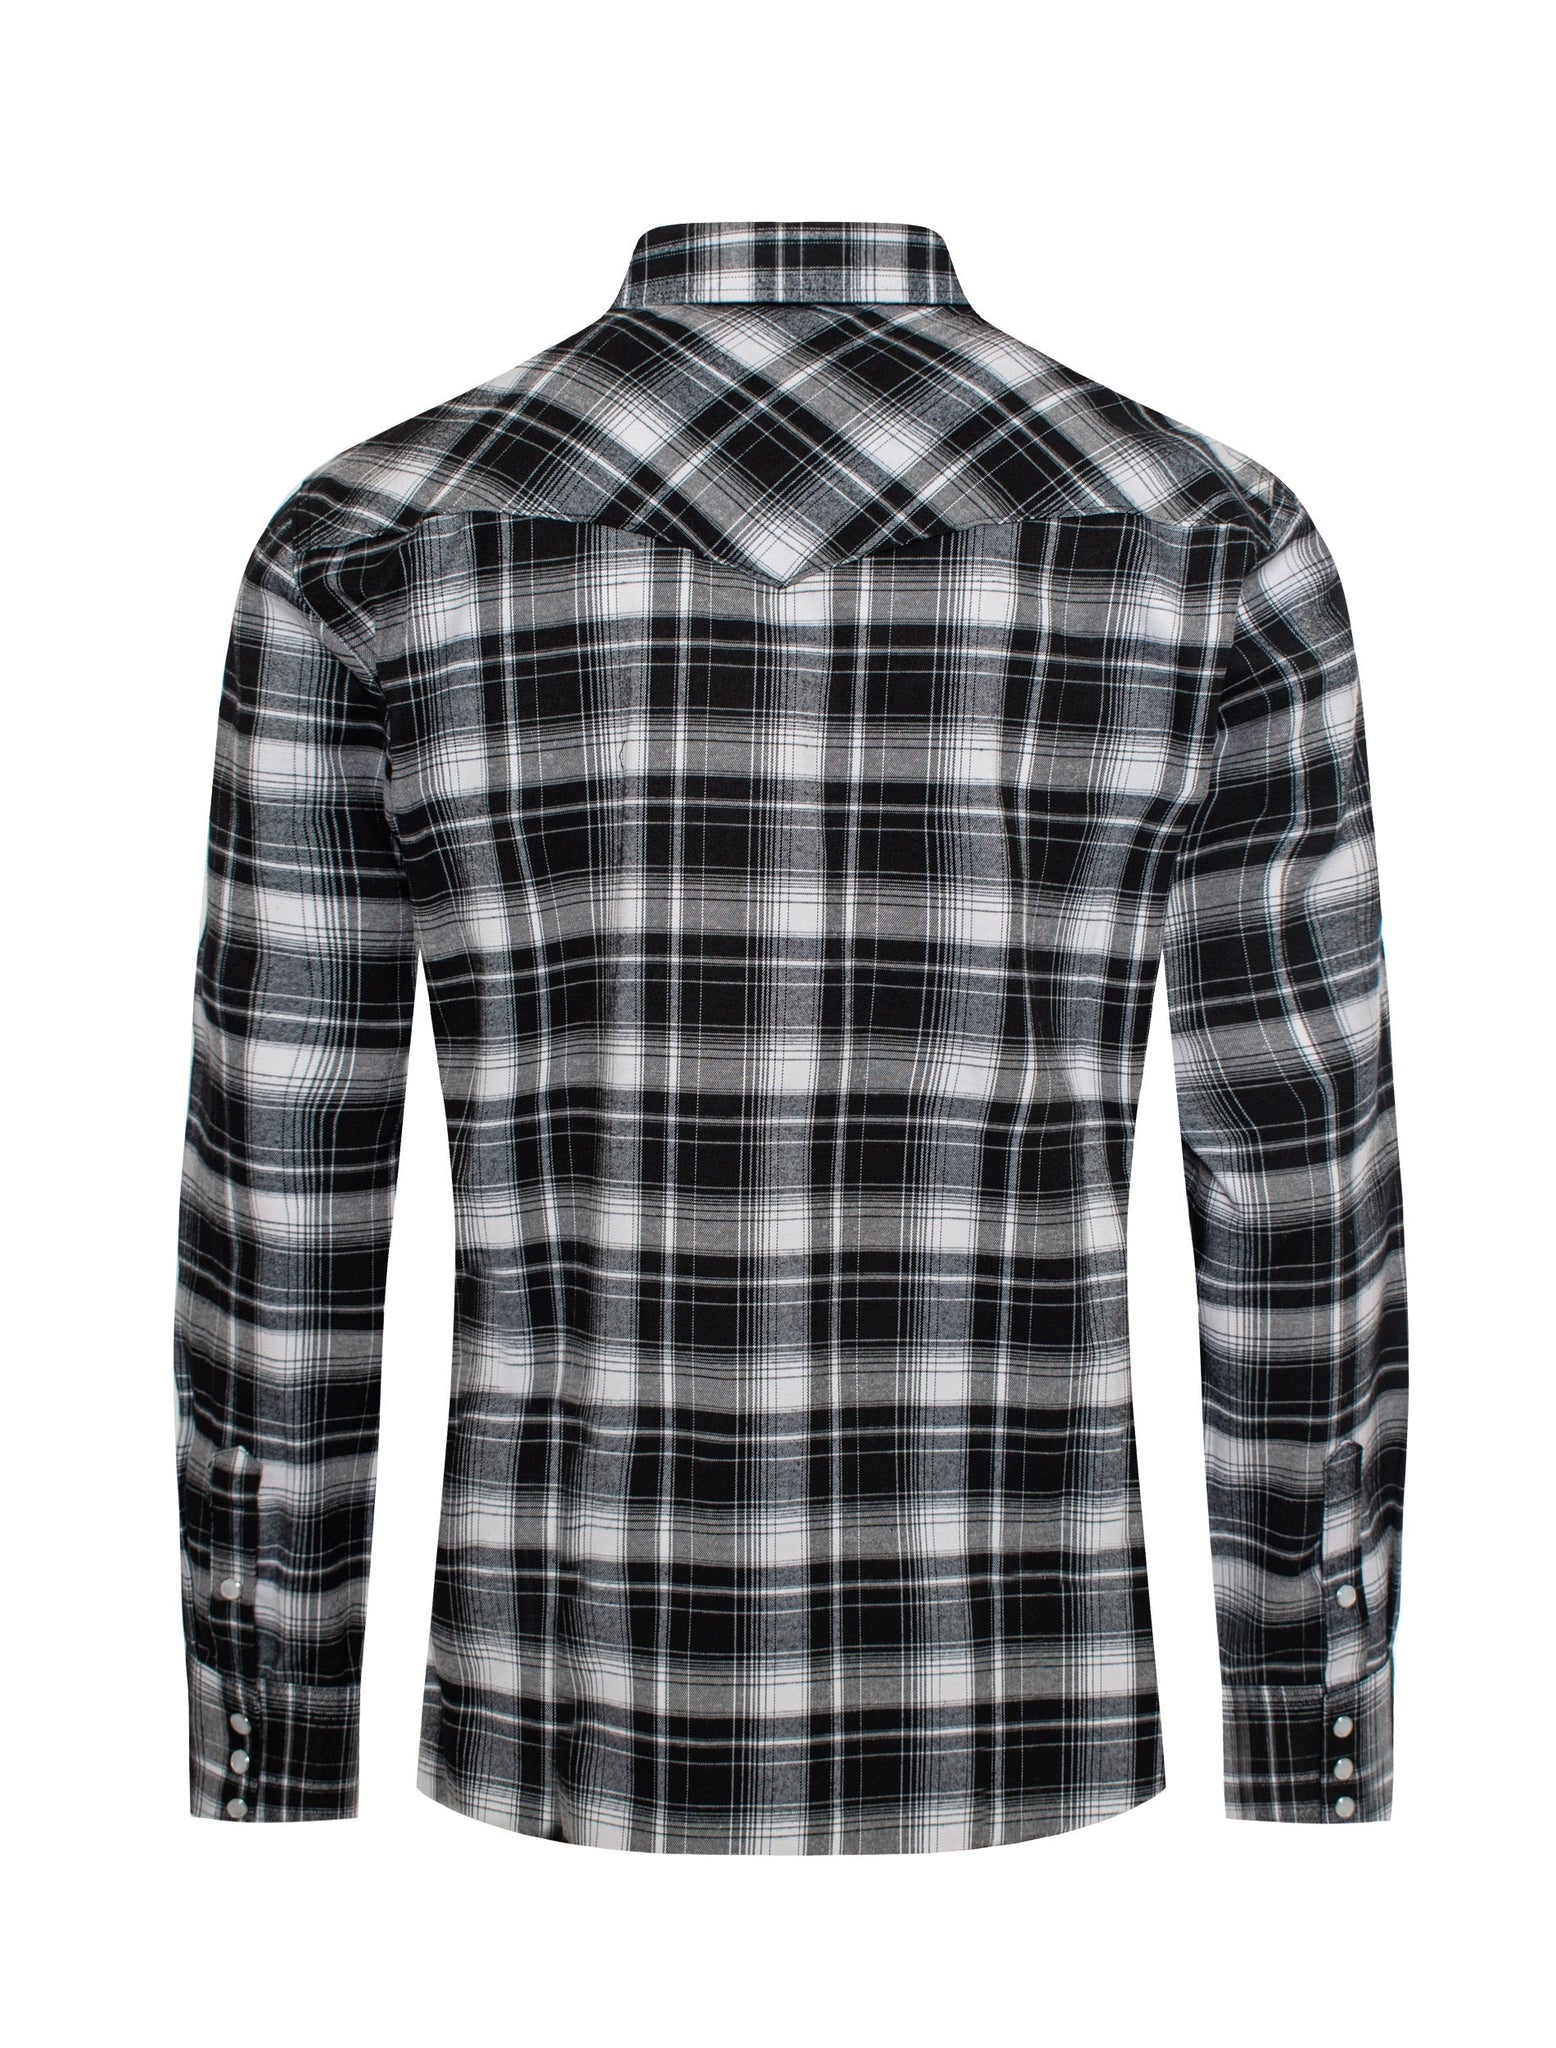 Men's Western Flannel Shirts With Snap Buttons-FLS300-301